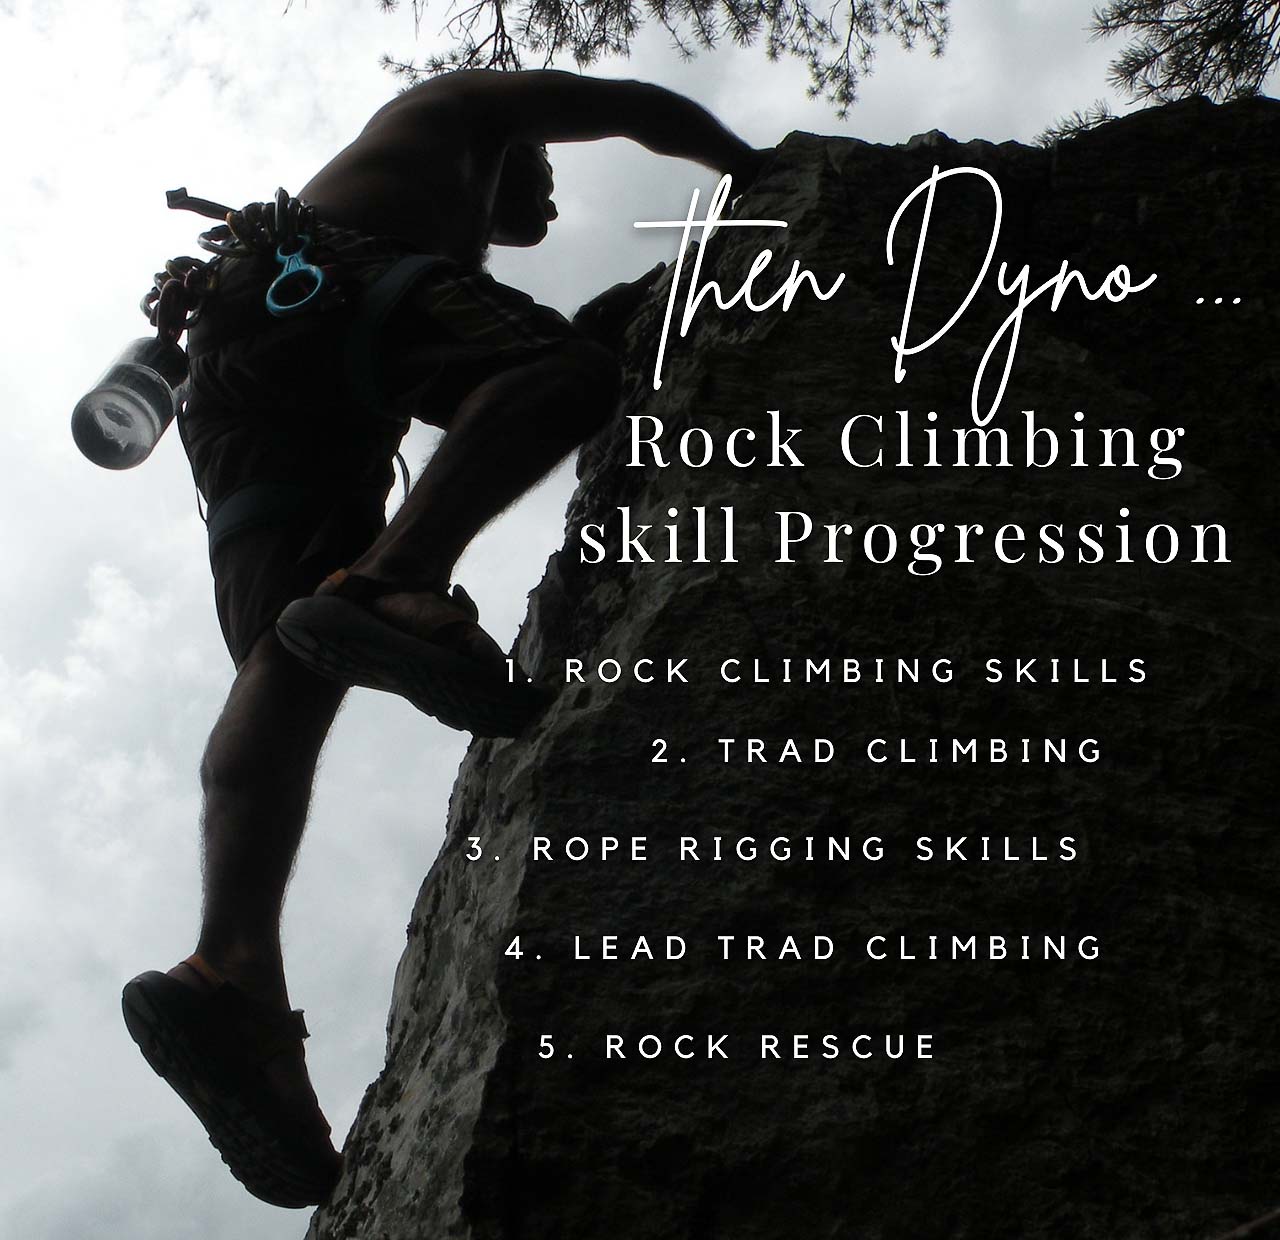 In a poster silhouette, Pankaj Lagwal is climbing a rock with rock climbing equipment and a water bottle dangling from his harness. The poster calls out the Dyno rock climbing progressions.